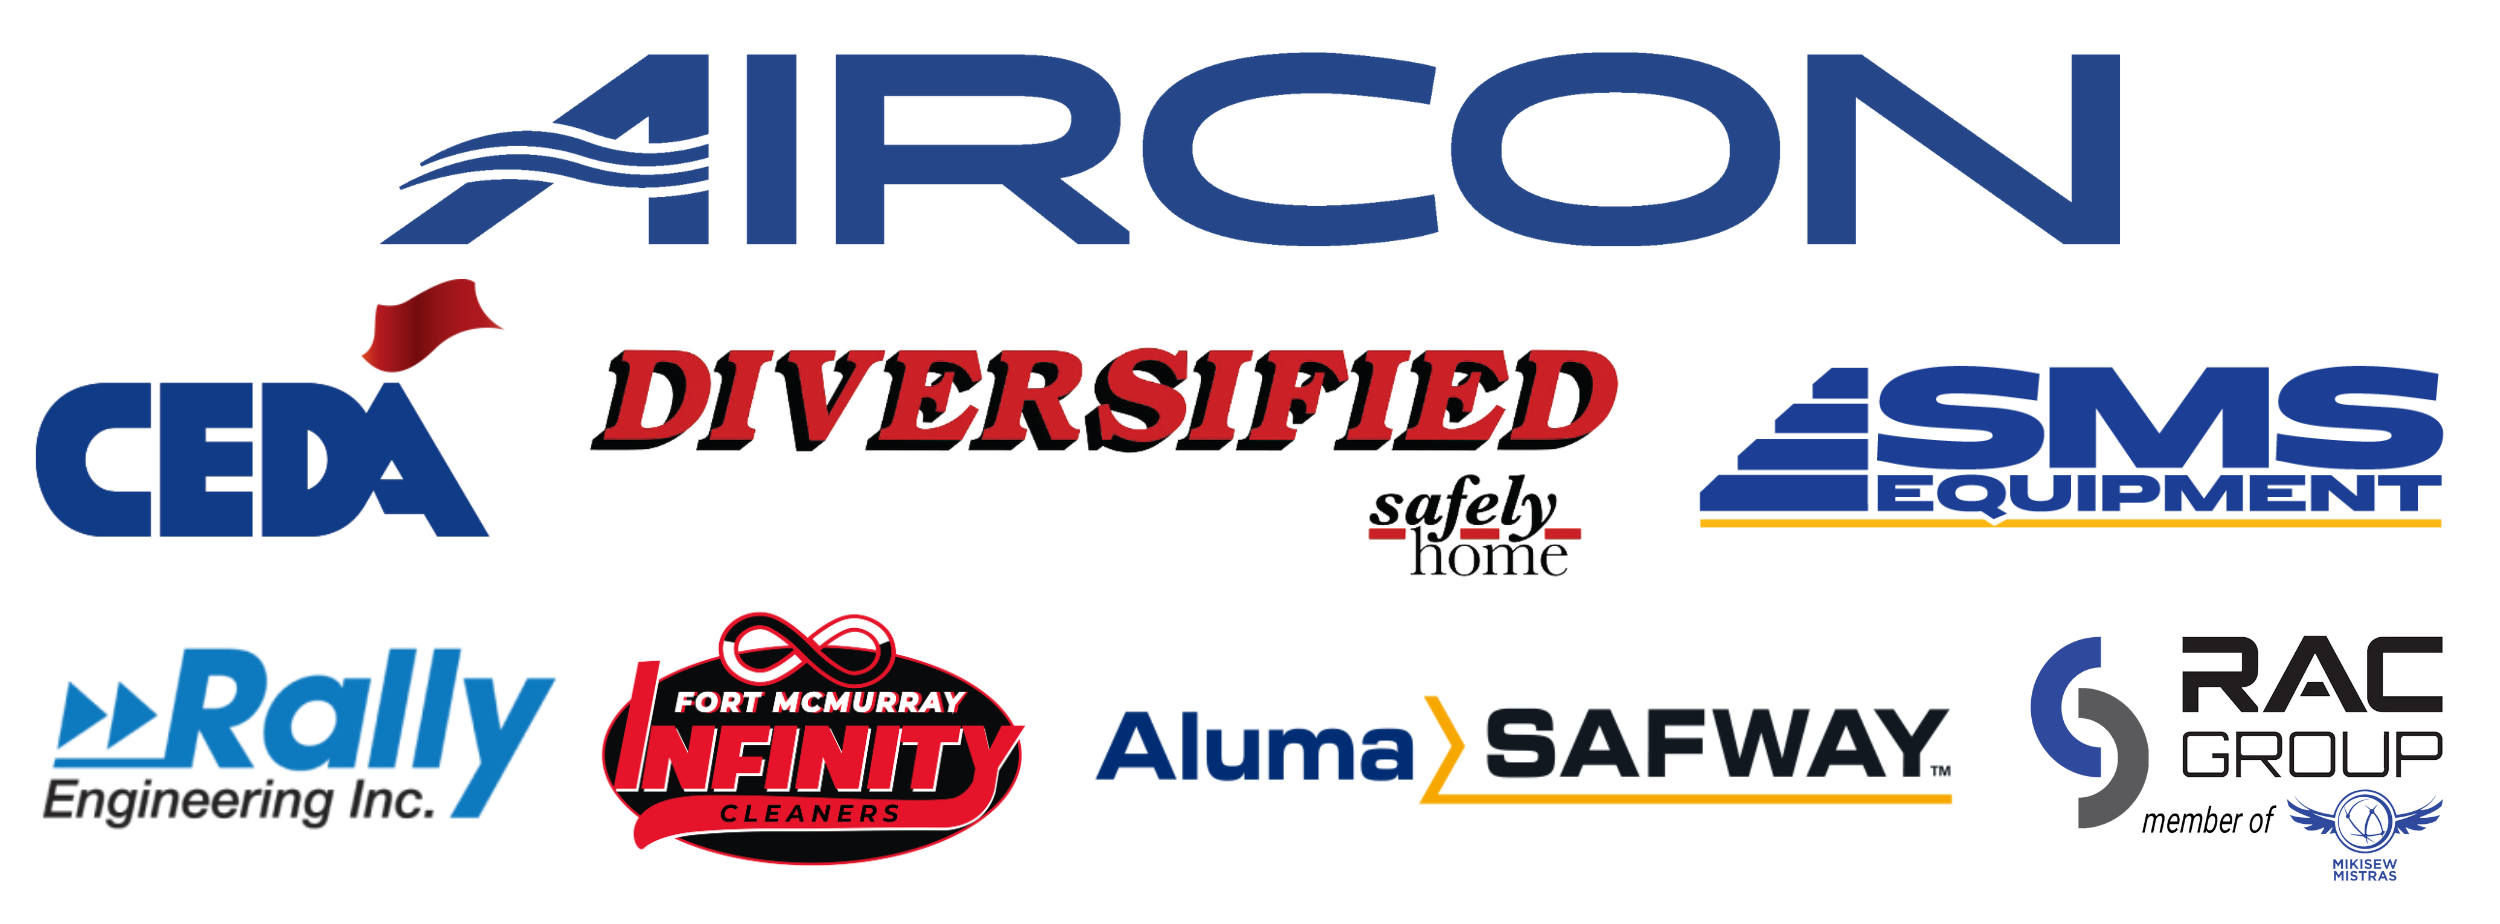 sponsor logos: aircon, CEDA, SMS, diversified, rally engineering, infinity cleaners